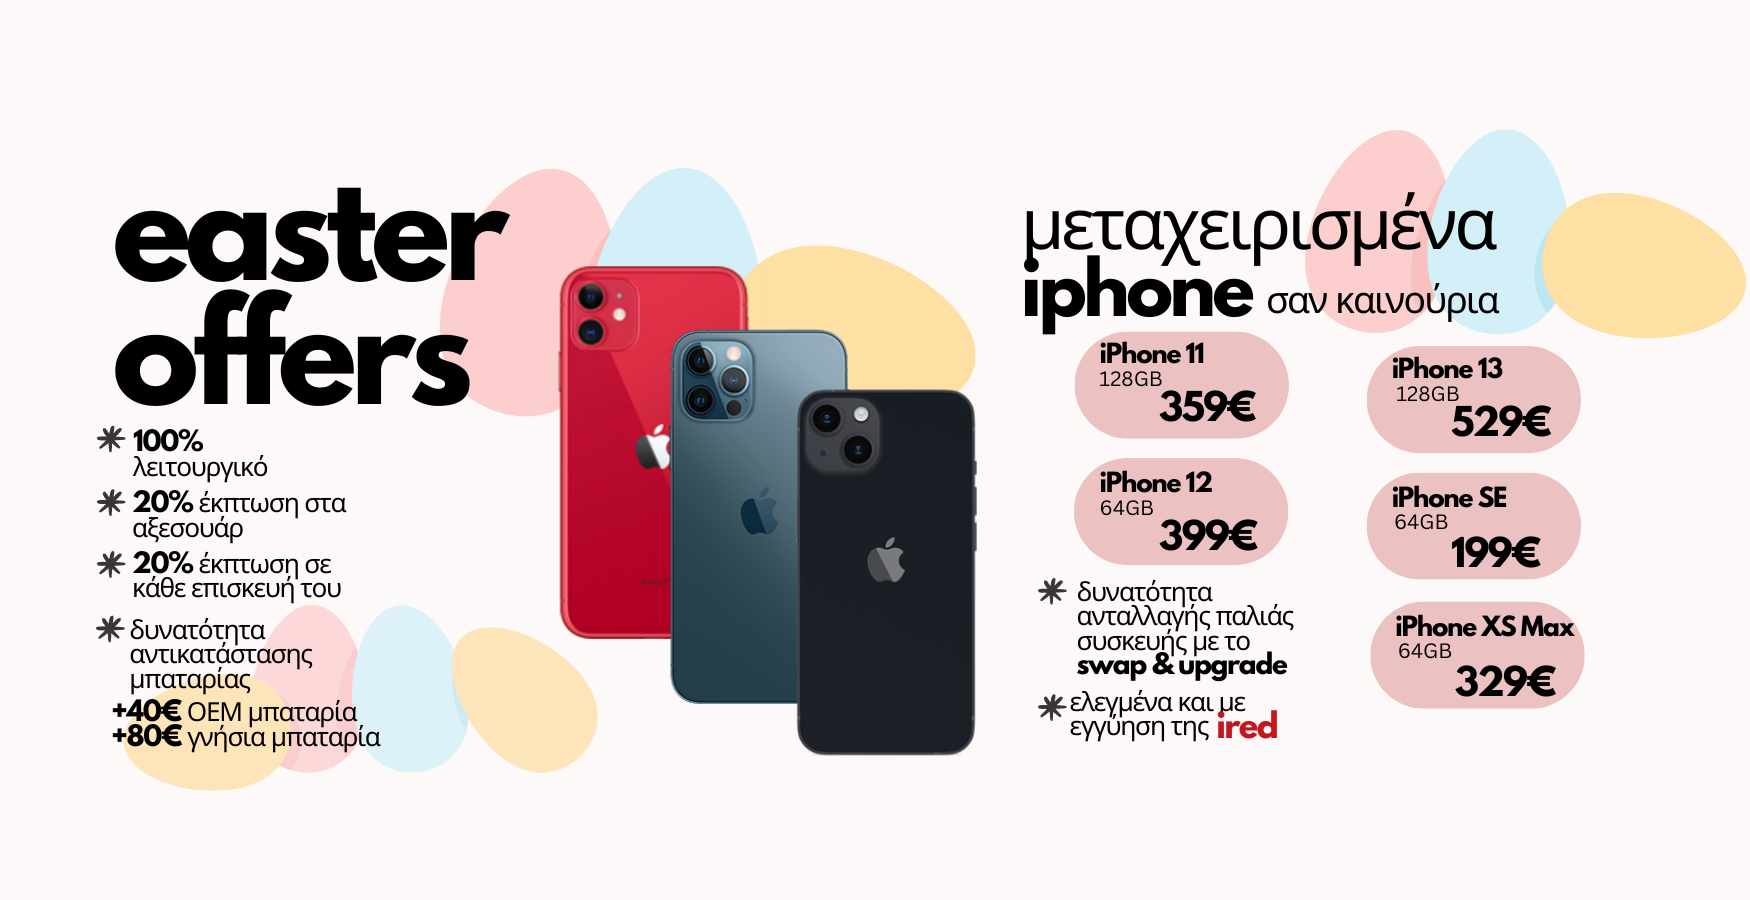 used_iphones_easter_offers_1750_x_900_px